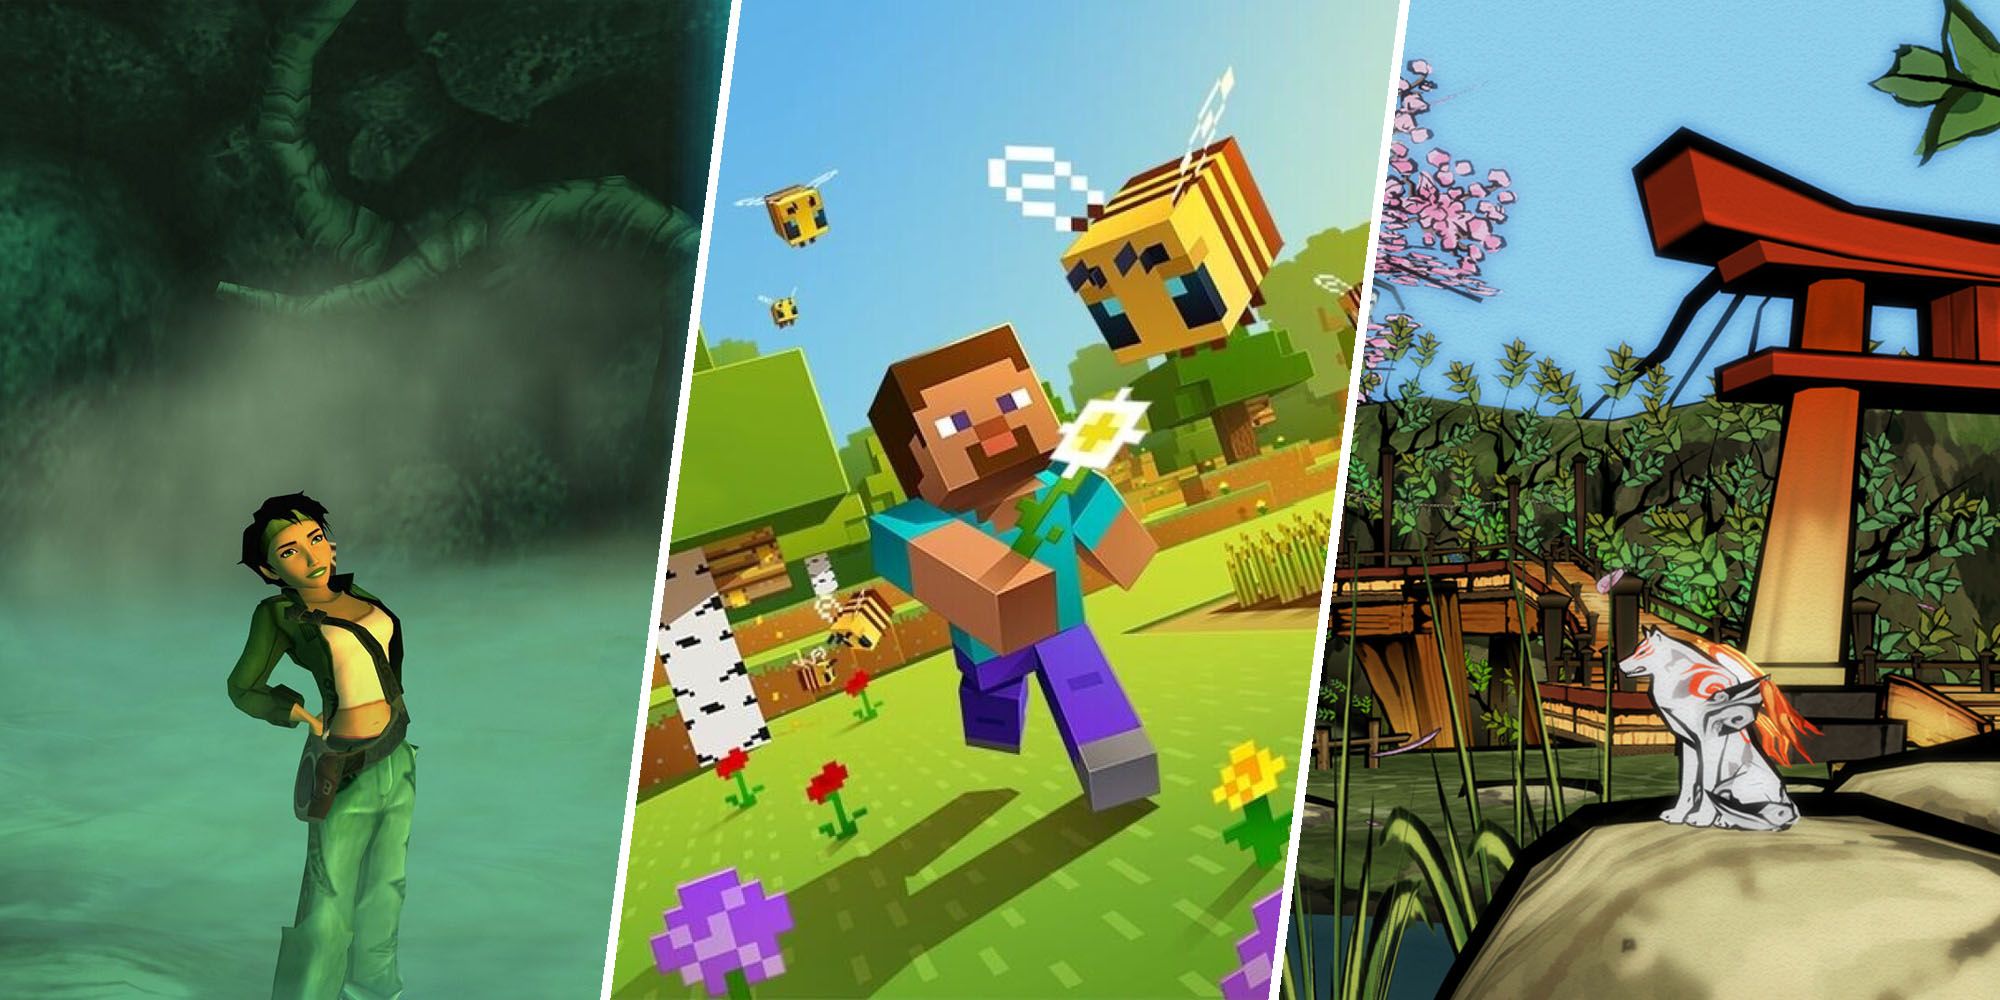 games-that-celebrate-nature-beyond-good-and-evil-minecraft-okami